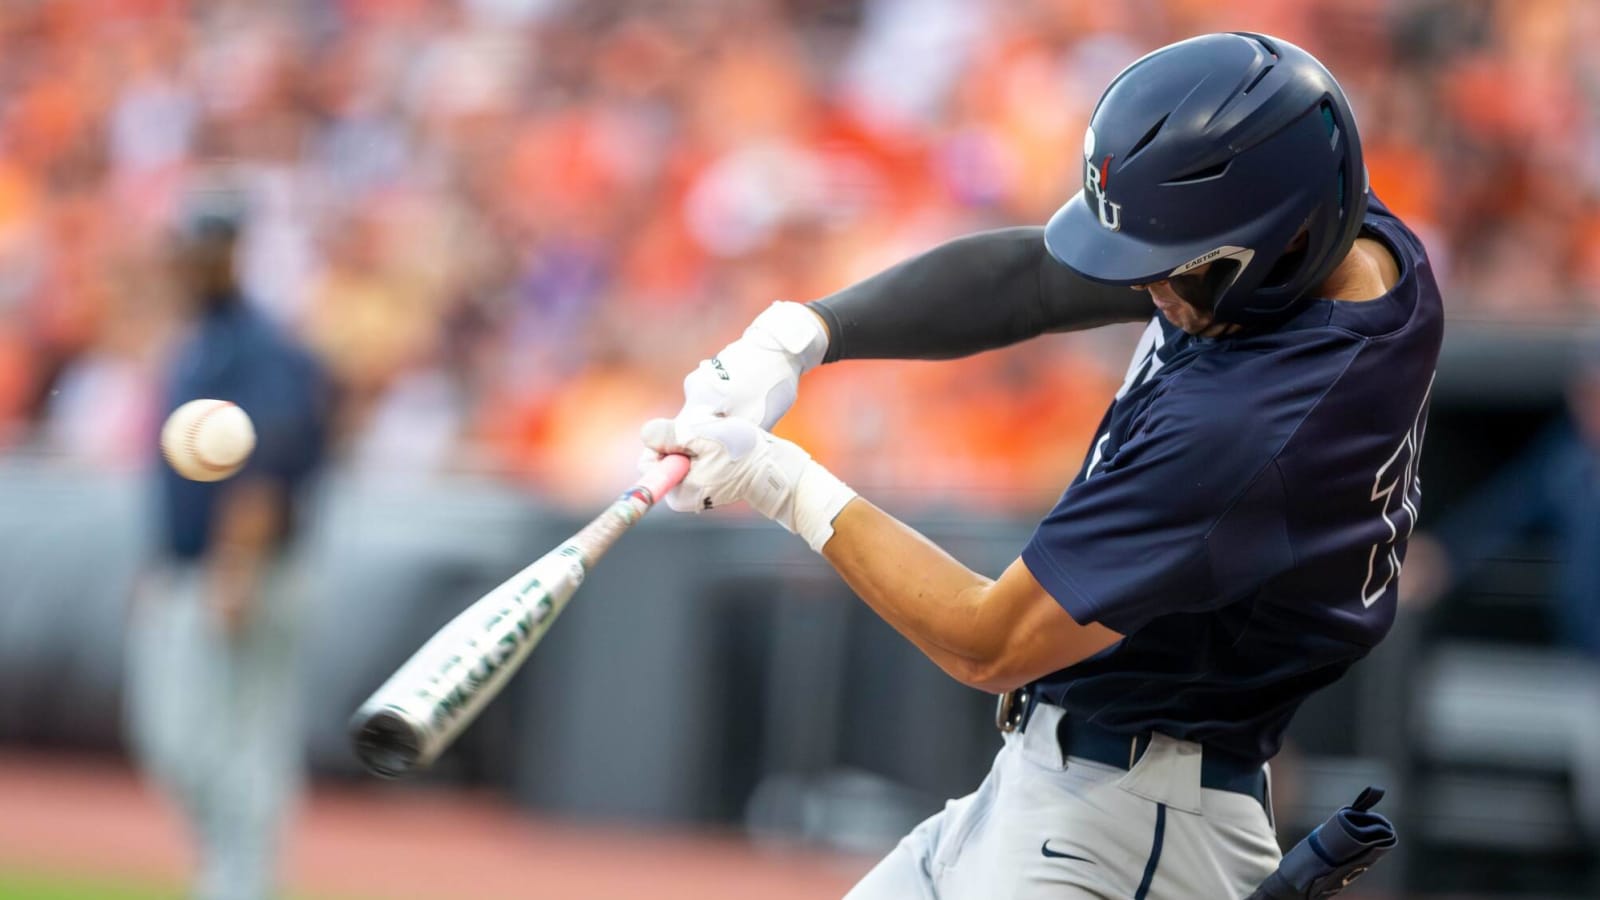 Watch Oral Roberts hits first CWS insidethepark homer in 20 years